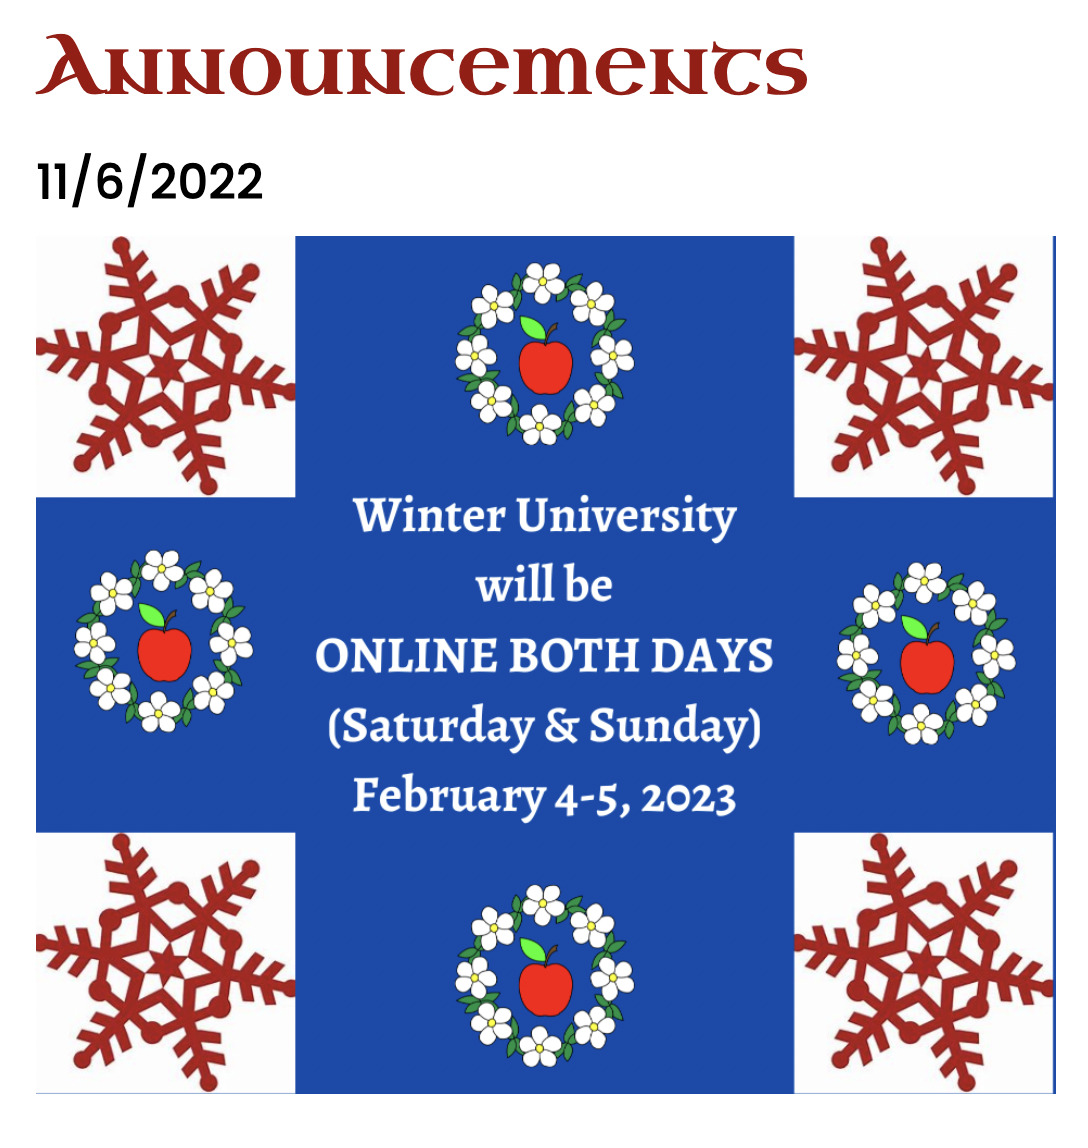 Winter University will be held online February 4th and 5th 2023